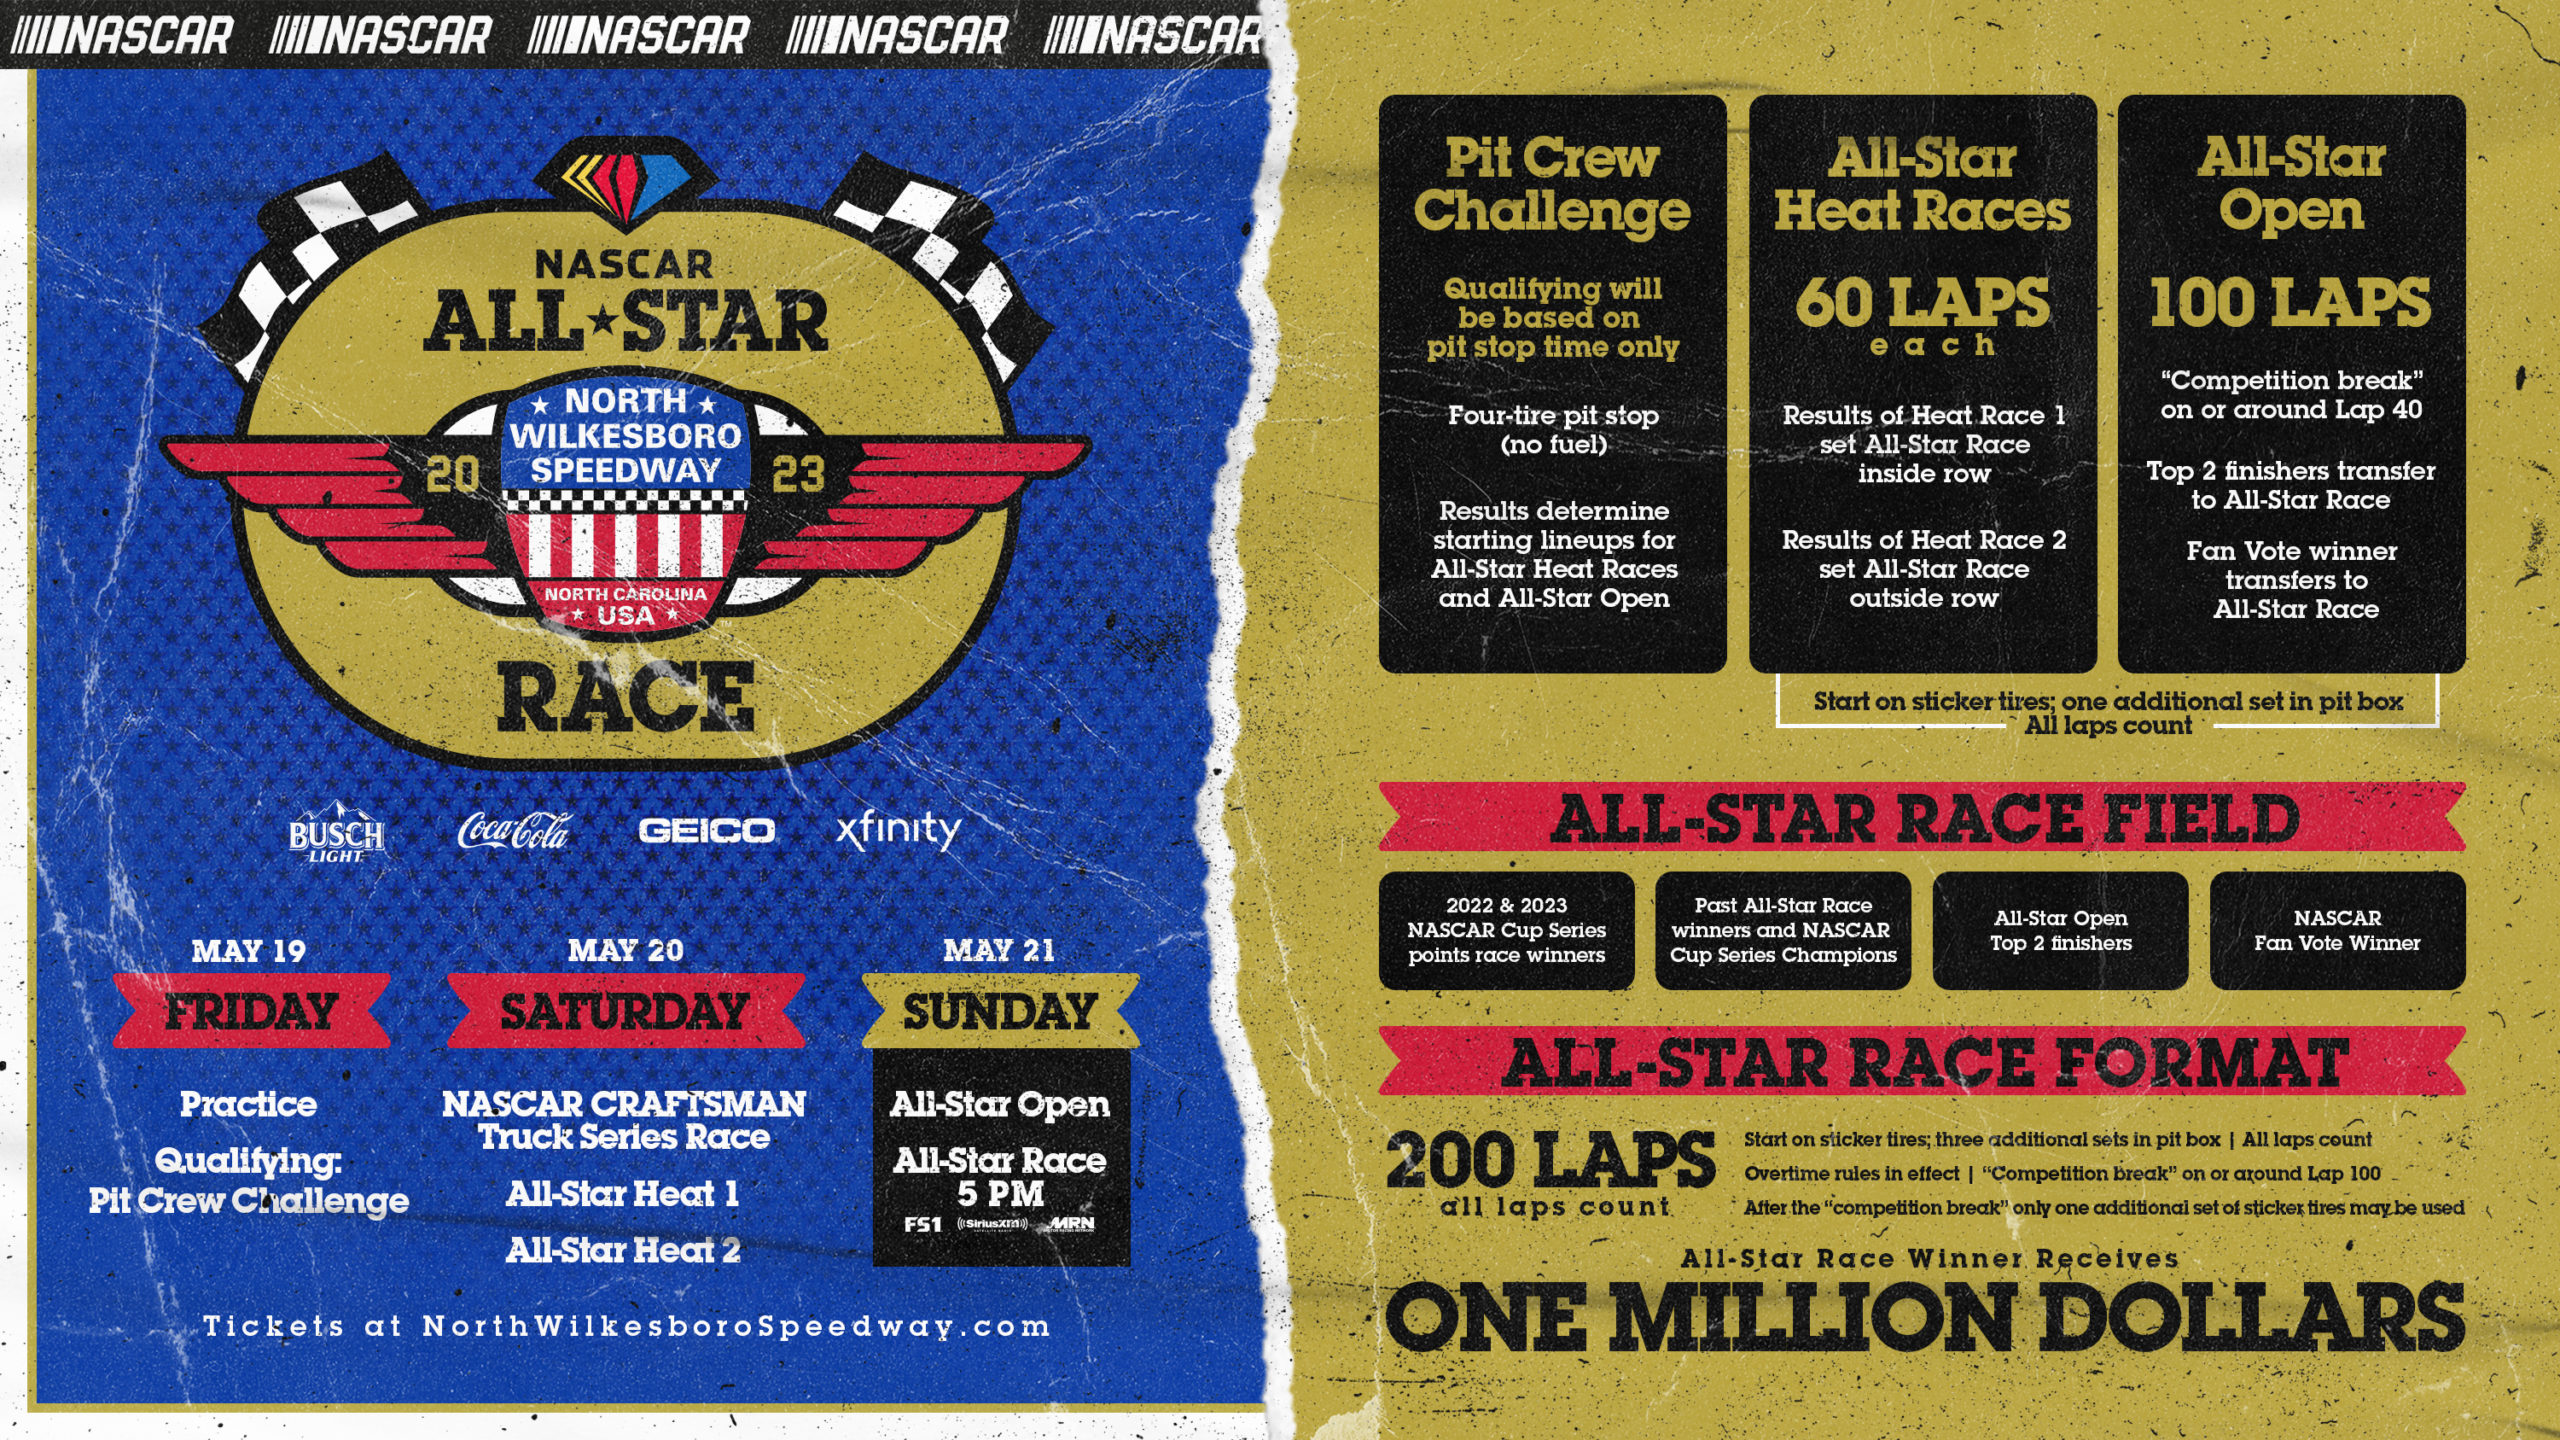 Nascar All-Star Race Preview